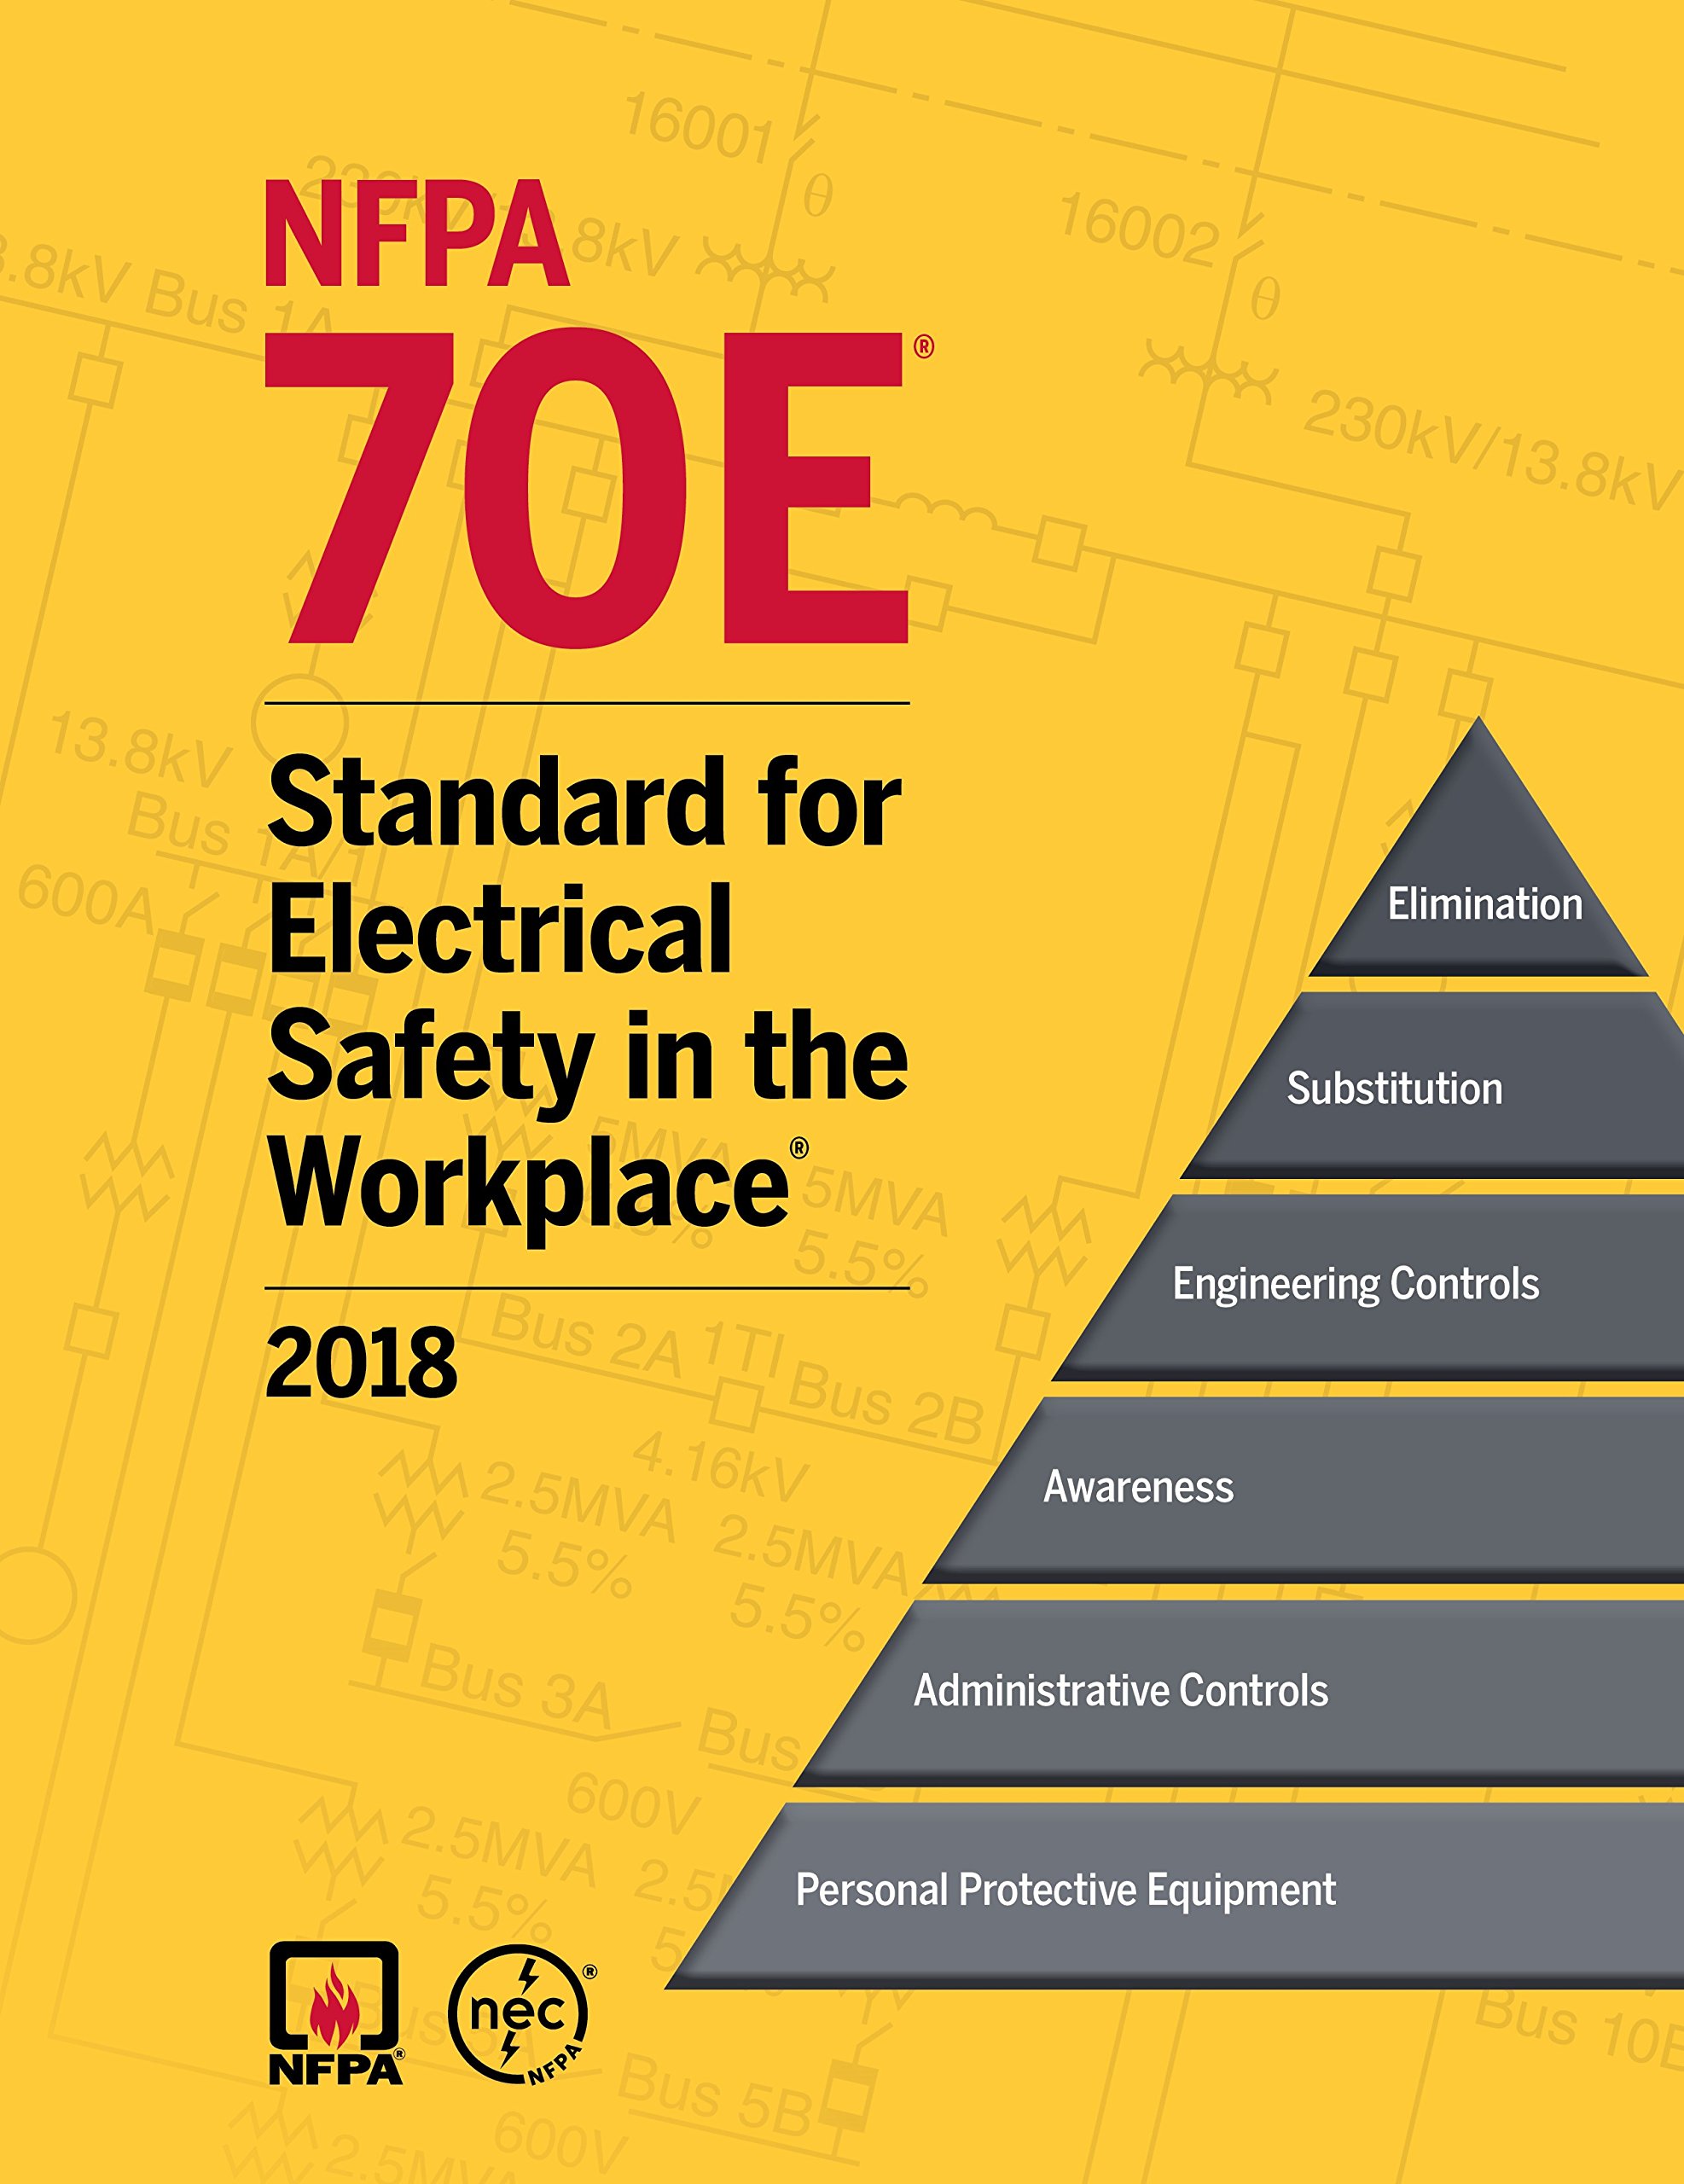 NFPA 70E: Standard for Electrical Safety in the Workplace